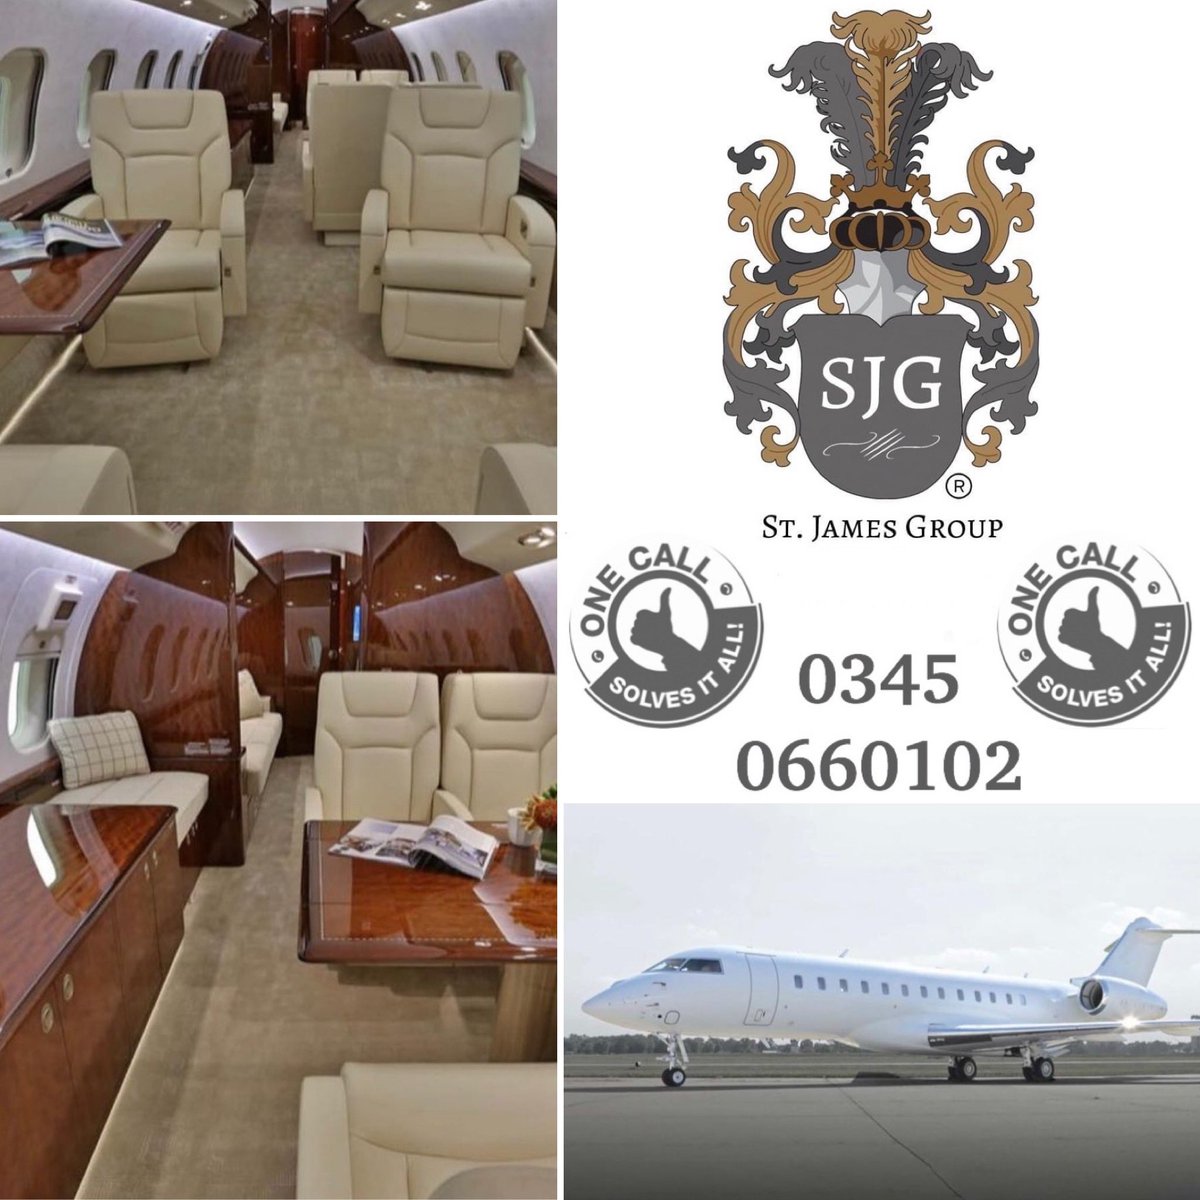 AVIATION SERVICES - SALES 

#luxury #luxurylifestyle #privatecharter #privatejets #aviation #sales #aviation #privatejetlife  #corporatejet #aviationlovers #luxurytravel #flyprivate #gulfstream #aircraft #pilot #airplane #falcon #aviationdaily #jetlife #cessna #bombardier